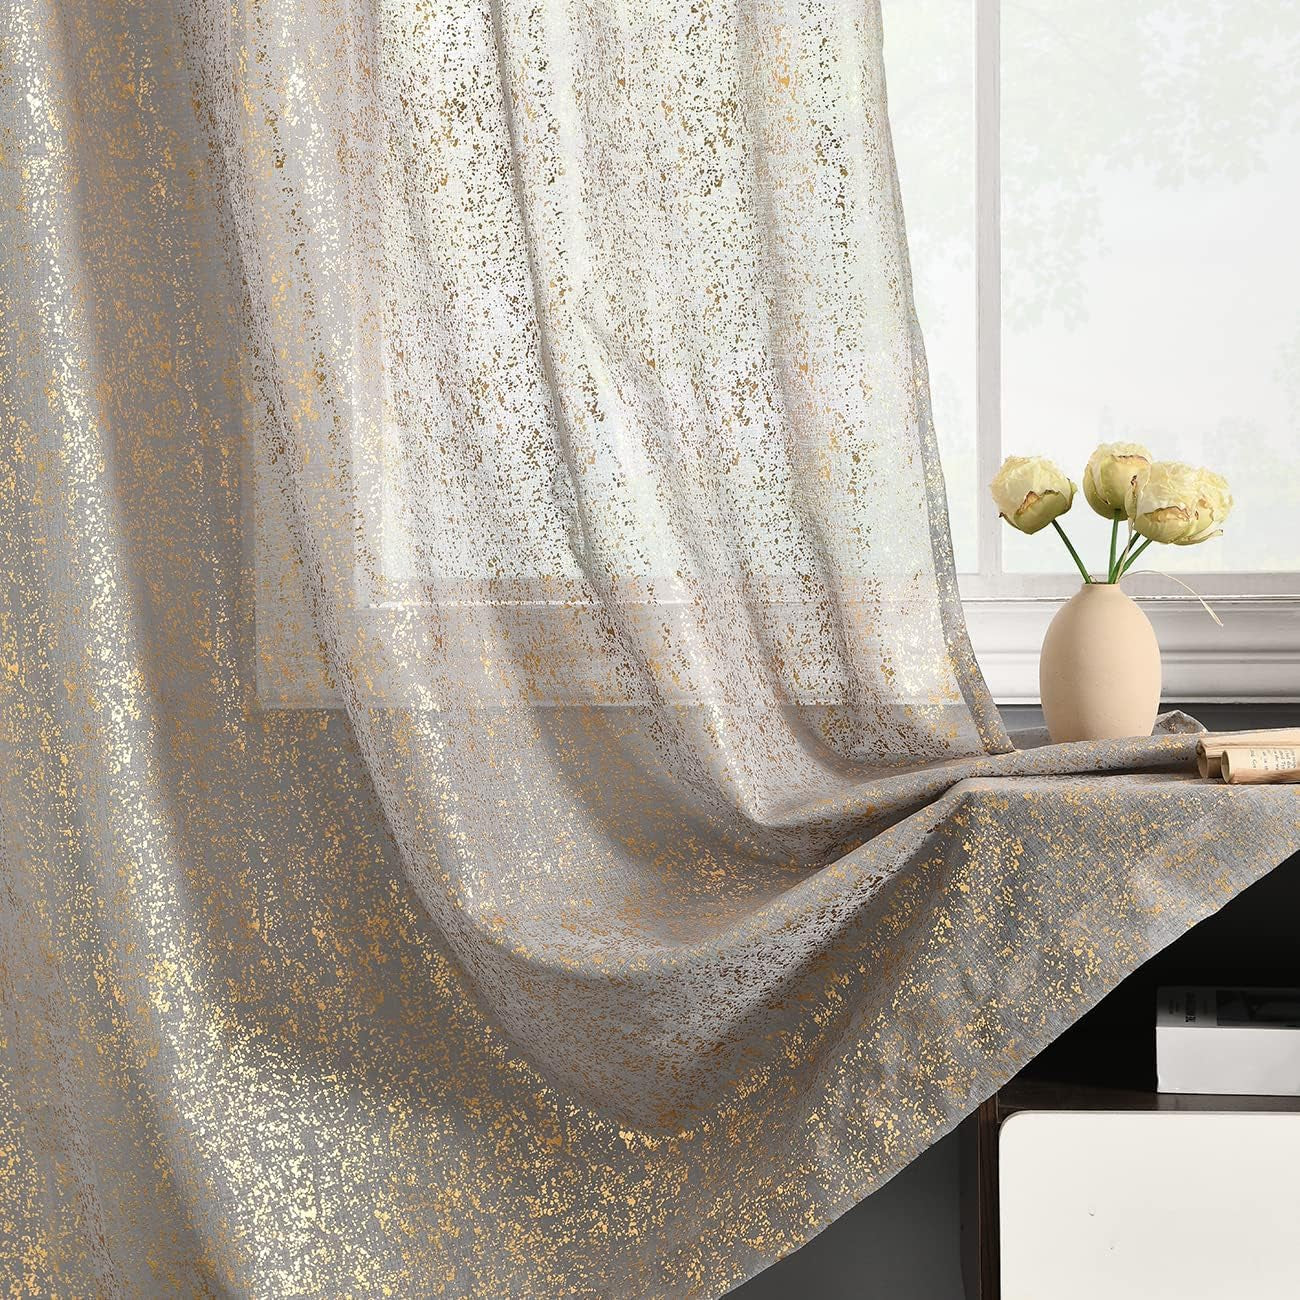 Silver Sheer Curtains 84 Inch Long - Chic Sparkle Curtains for Living Room, Rod Pocket Glitter Sheer Curtains for Windows Privacy Silver Grey Sheer Panels, 52 X 84 Inch, 2 Panels, Silver Gray  TERLYTEX Gold Grey W52 X L84 Inch|Pair 